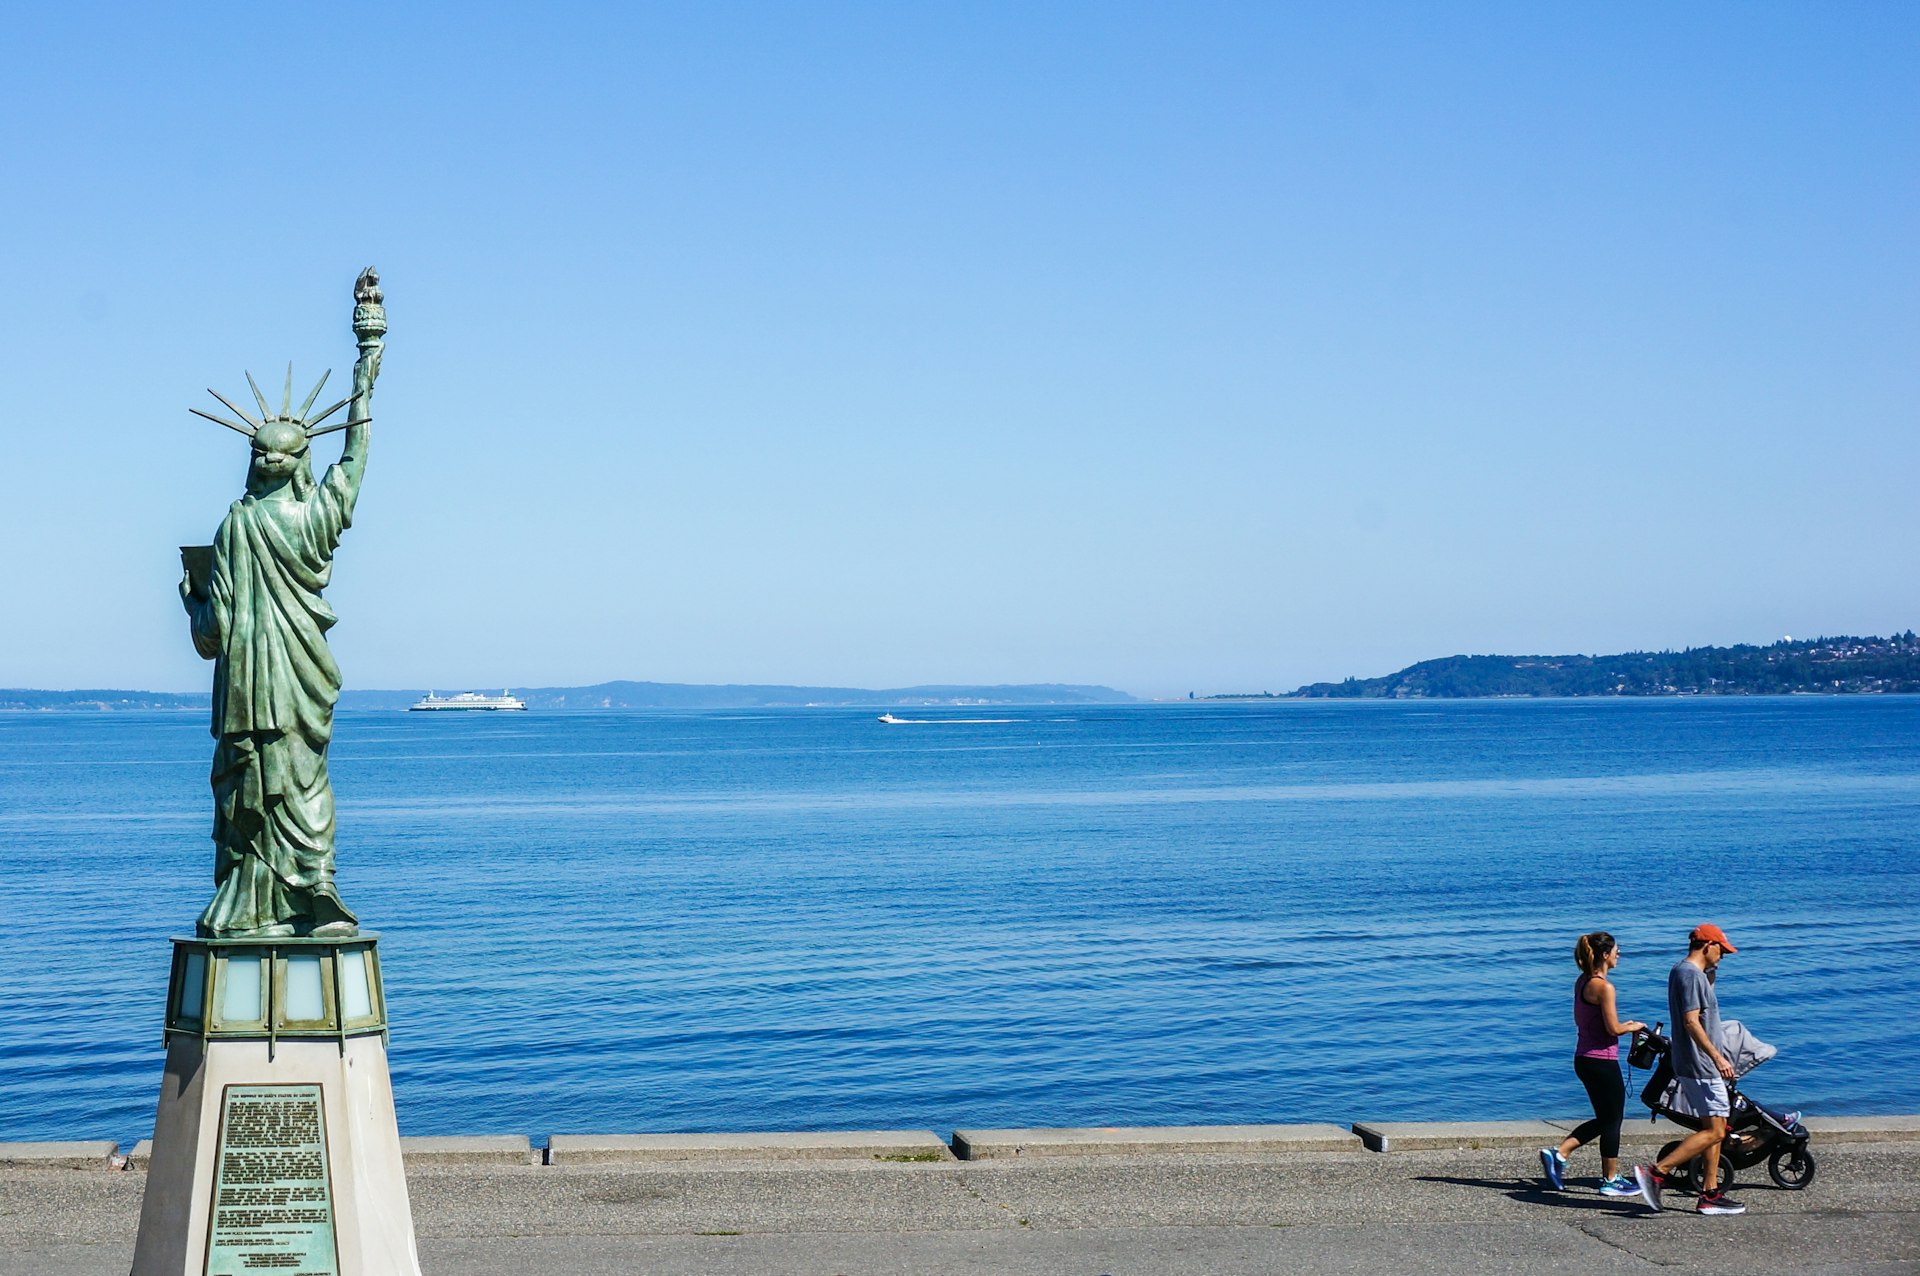 Seattle’s diminutive Statue of Liberty © Valery Stimac / Lonely Planet